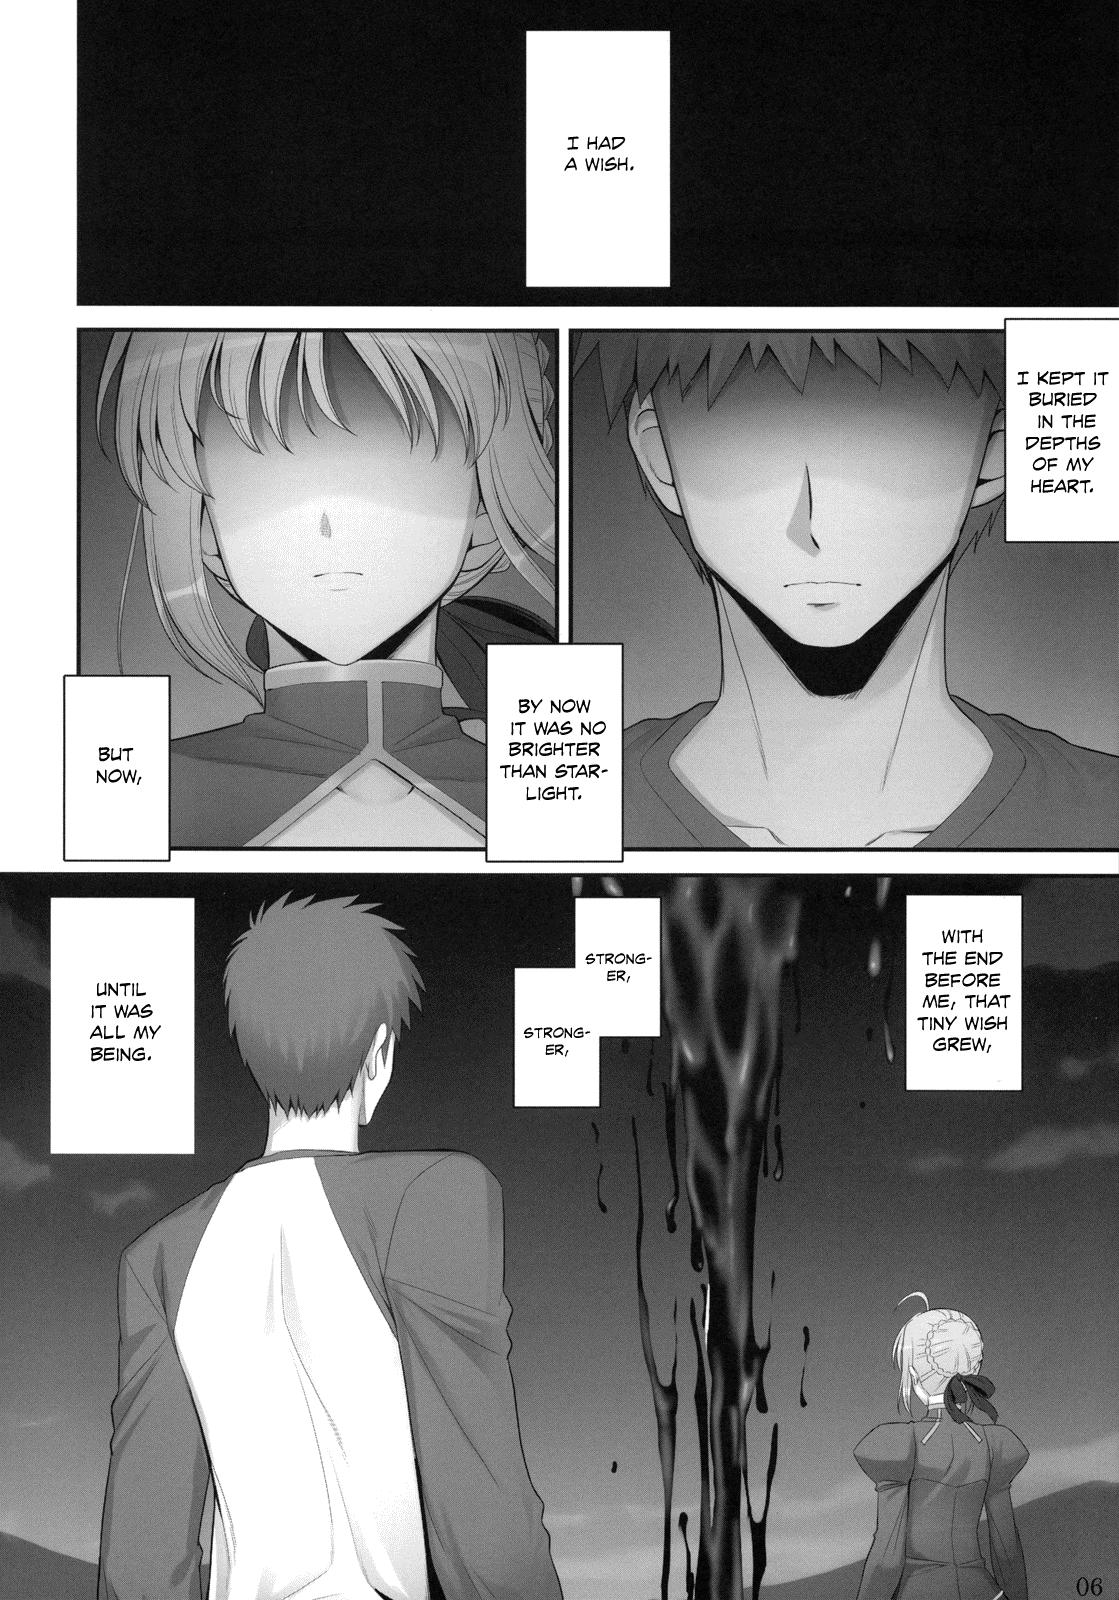 Ebony RE 09 - Fate stay night Awesome - Page 5